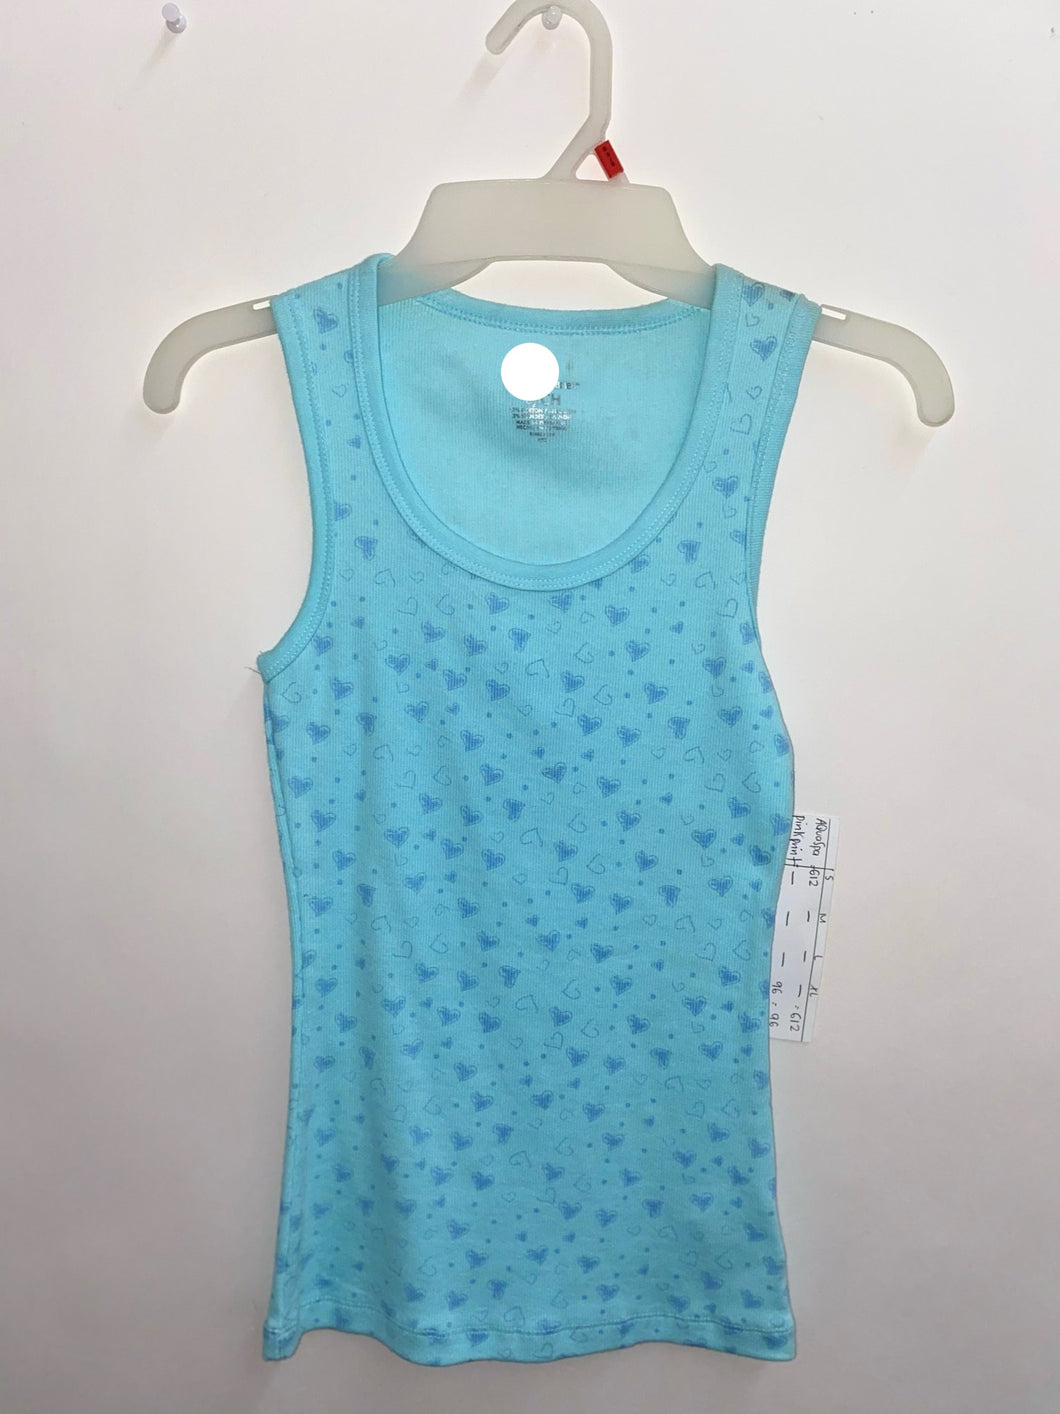 Blue Hearts Tank Top (12 pack)